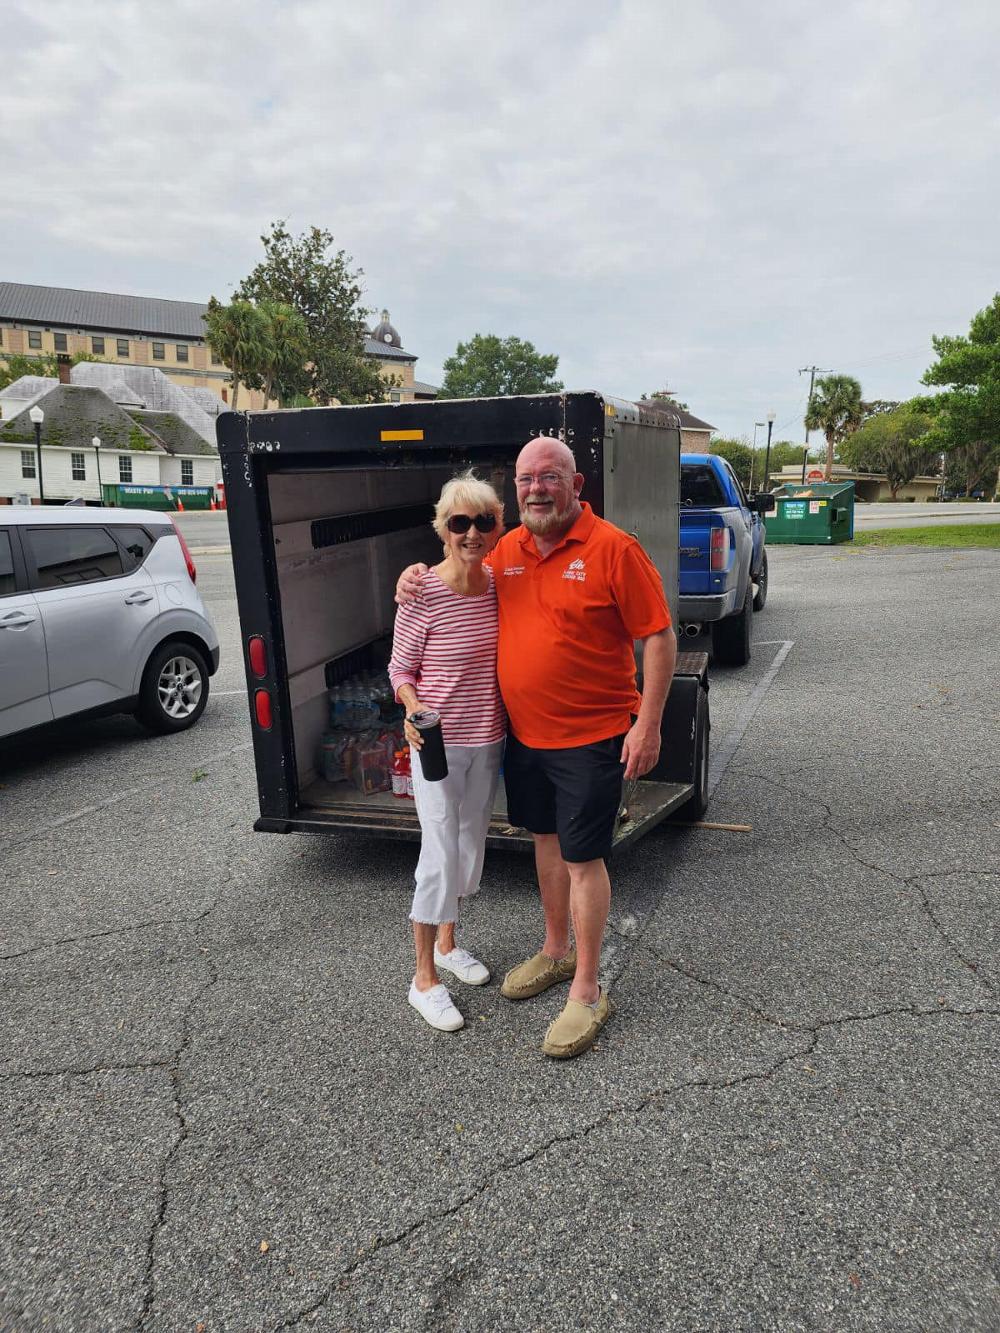 Good Member Rosemary Coleman and Exalted Ruler Chris Samson making a delivery of water and food stuff to Horseshoe Beach after the devastation of Hurricane Idalia on September 2nd. 